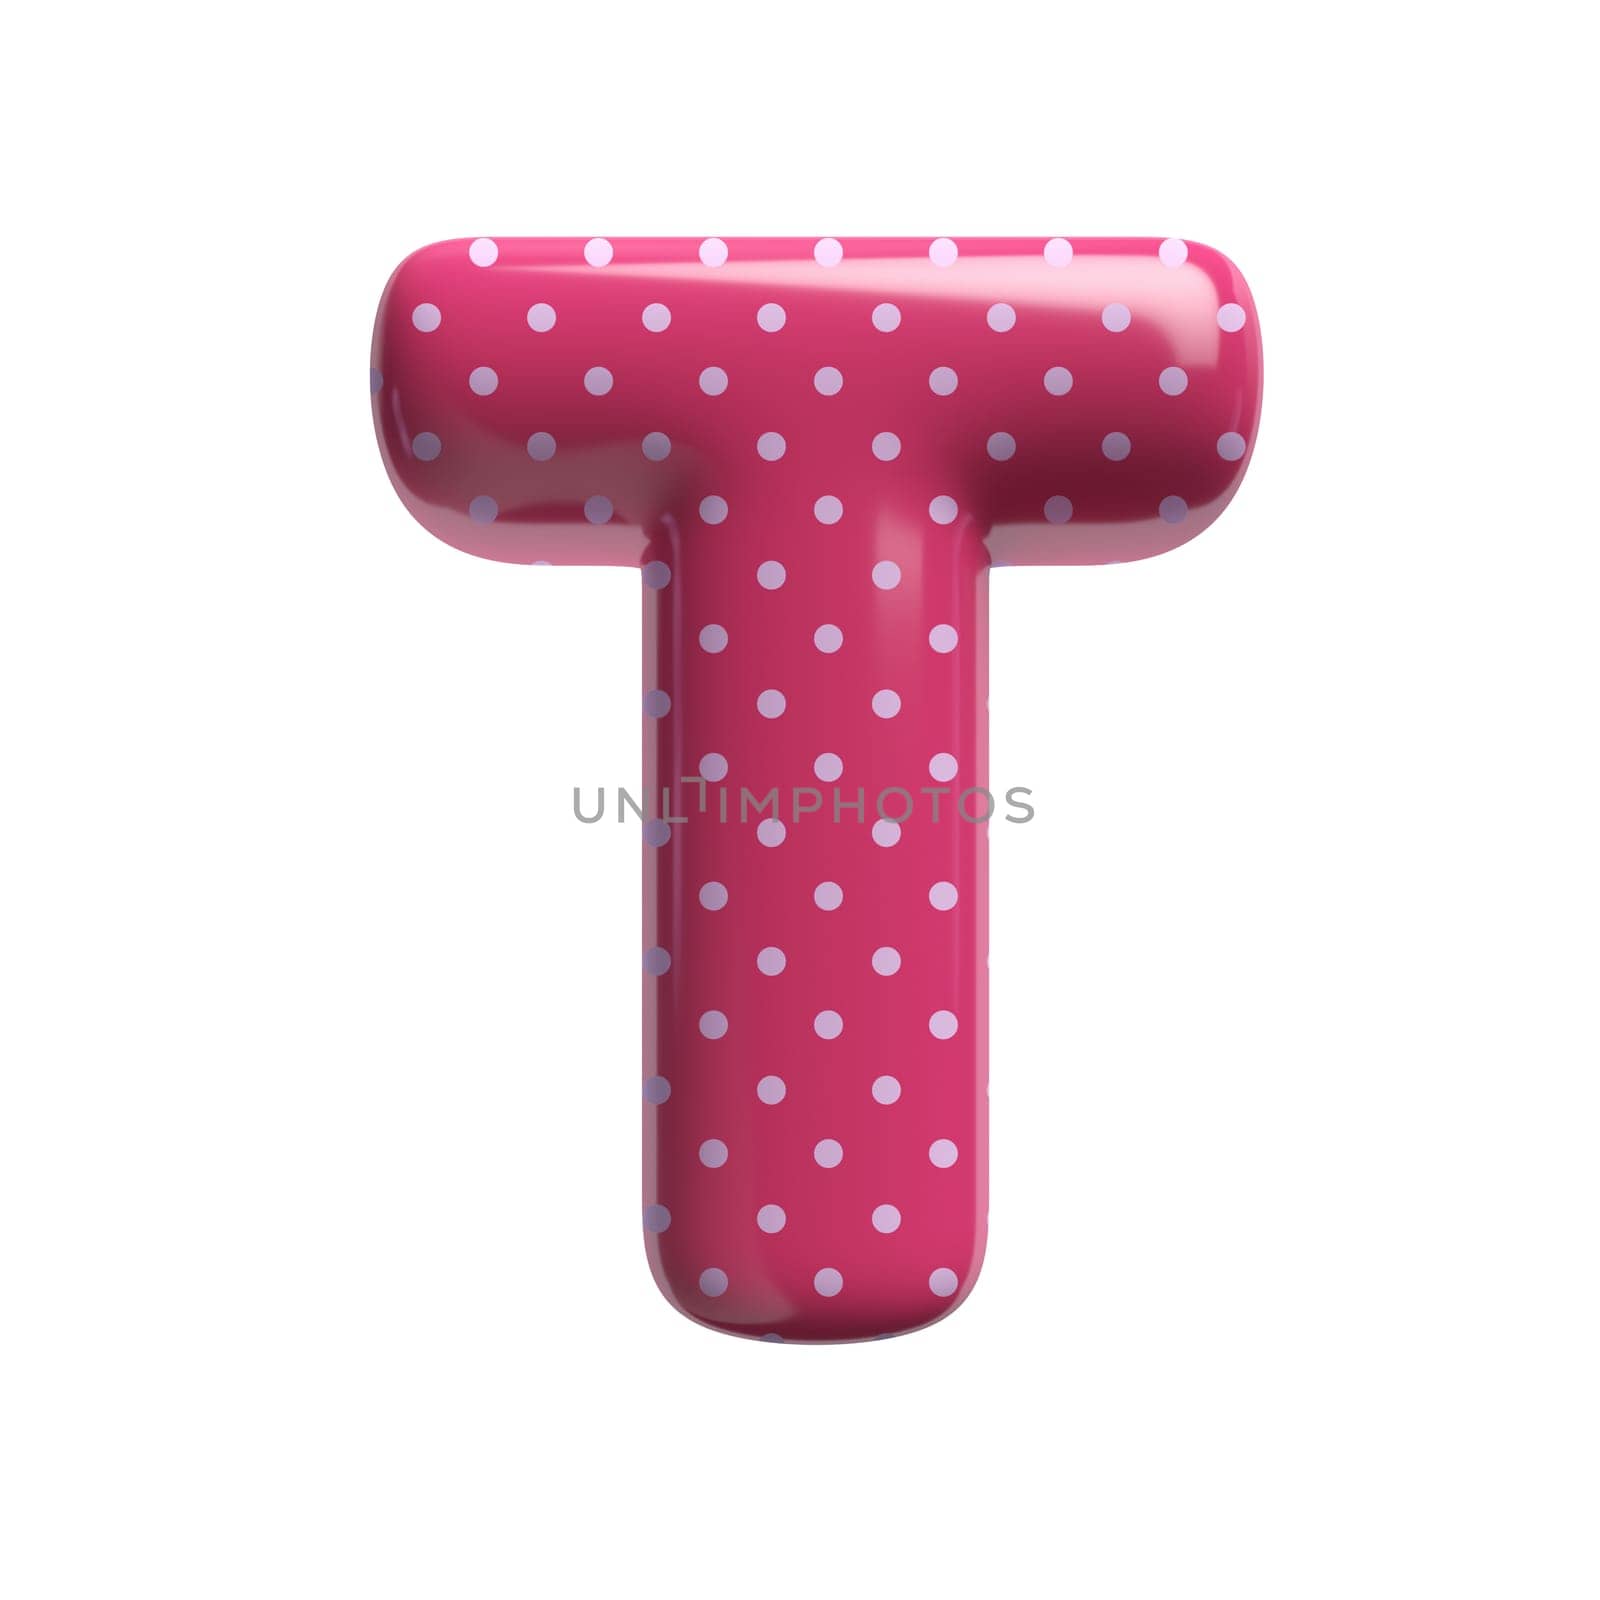 Polka dot letter T - Capital 3d pink retro font isolated on white background. This alphabet is perfect for creative illustrations related but not limited to Fashion, retro design, decoration...